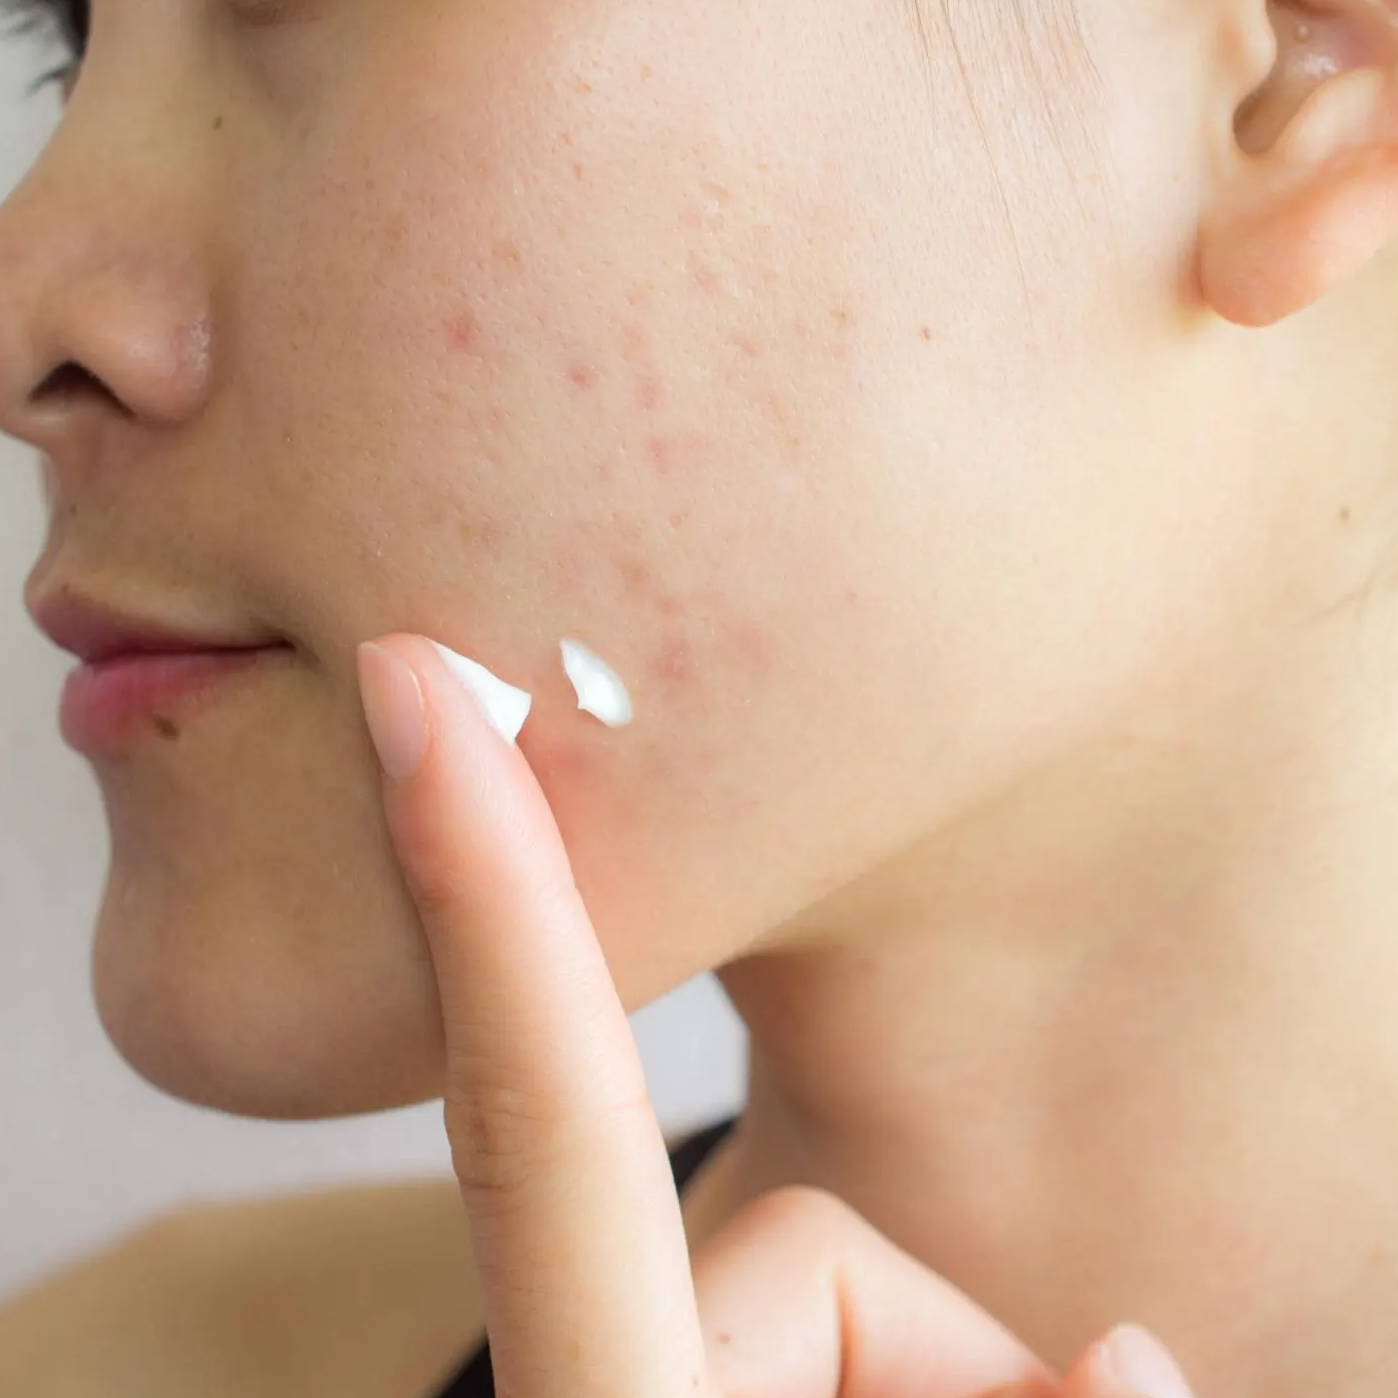 Woman with oily skin and acne applying moisturizer